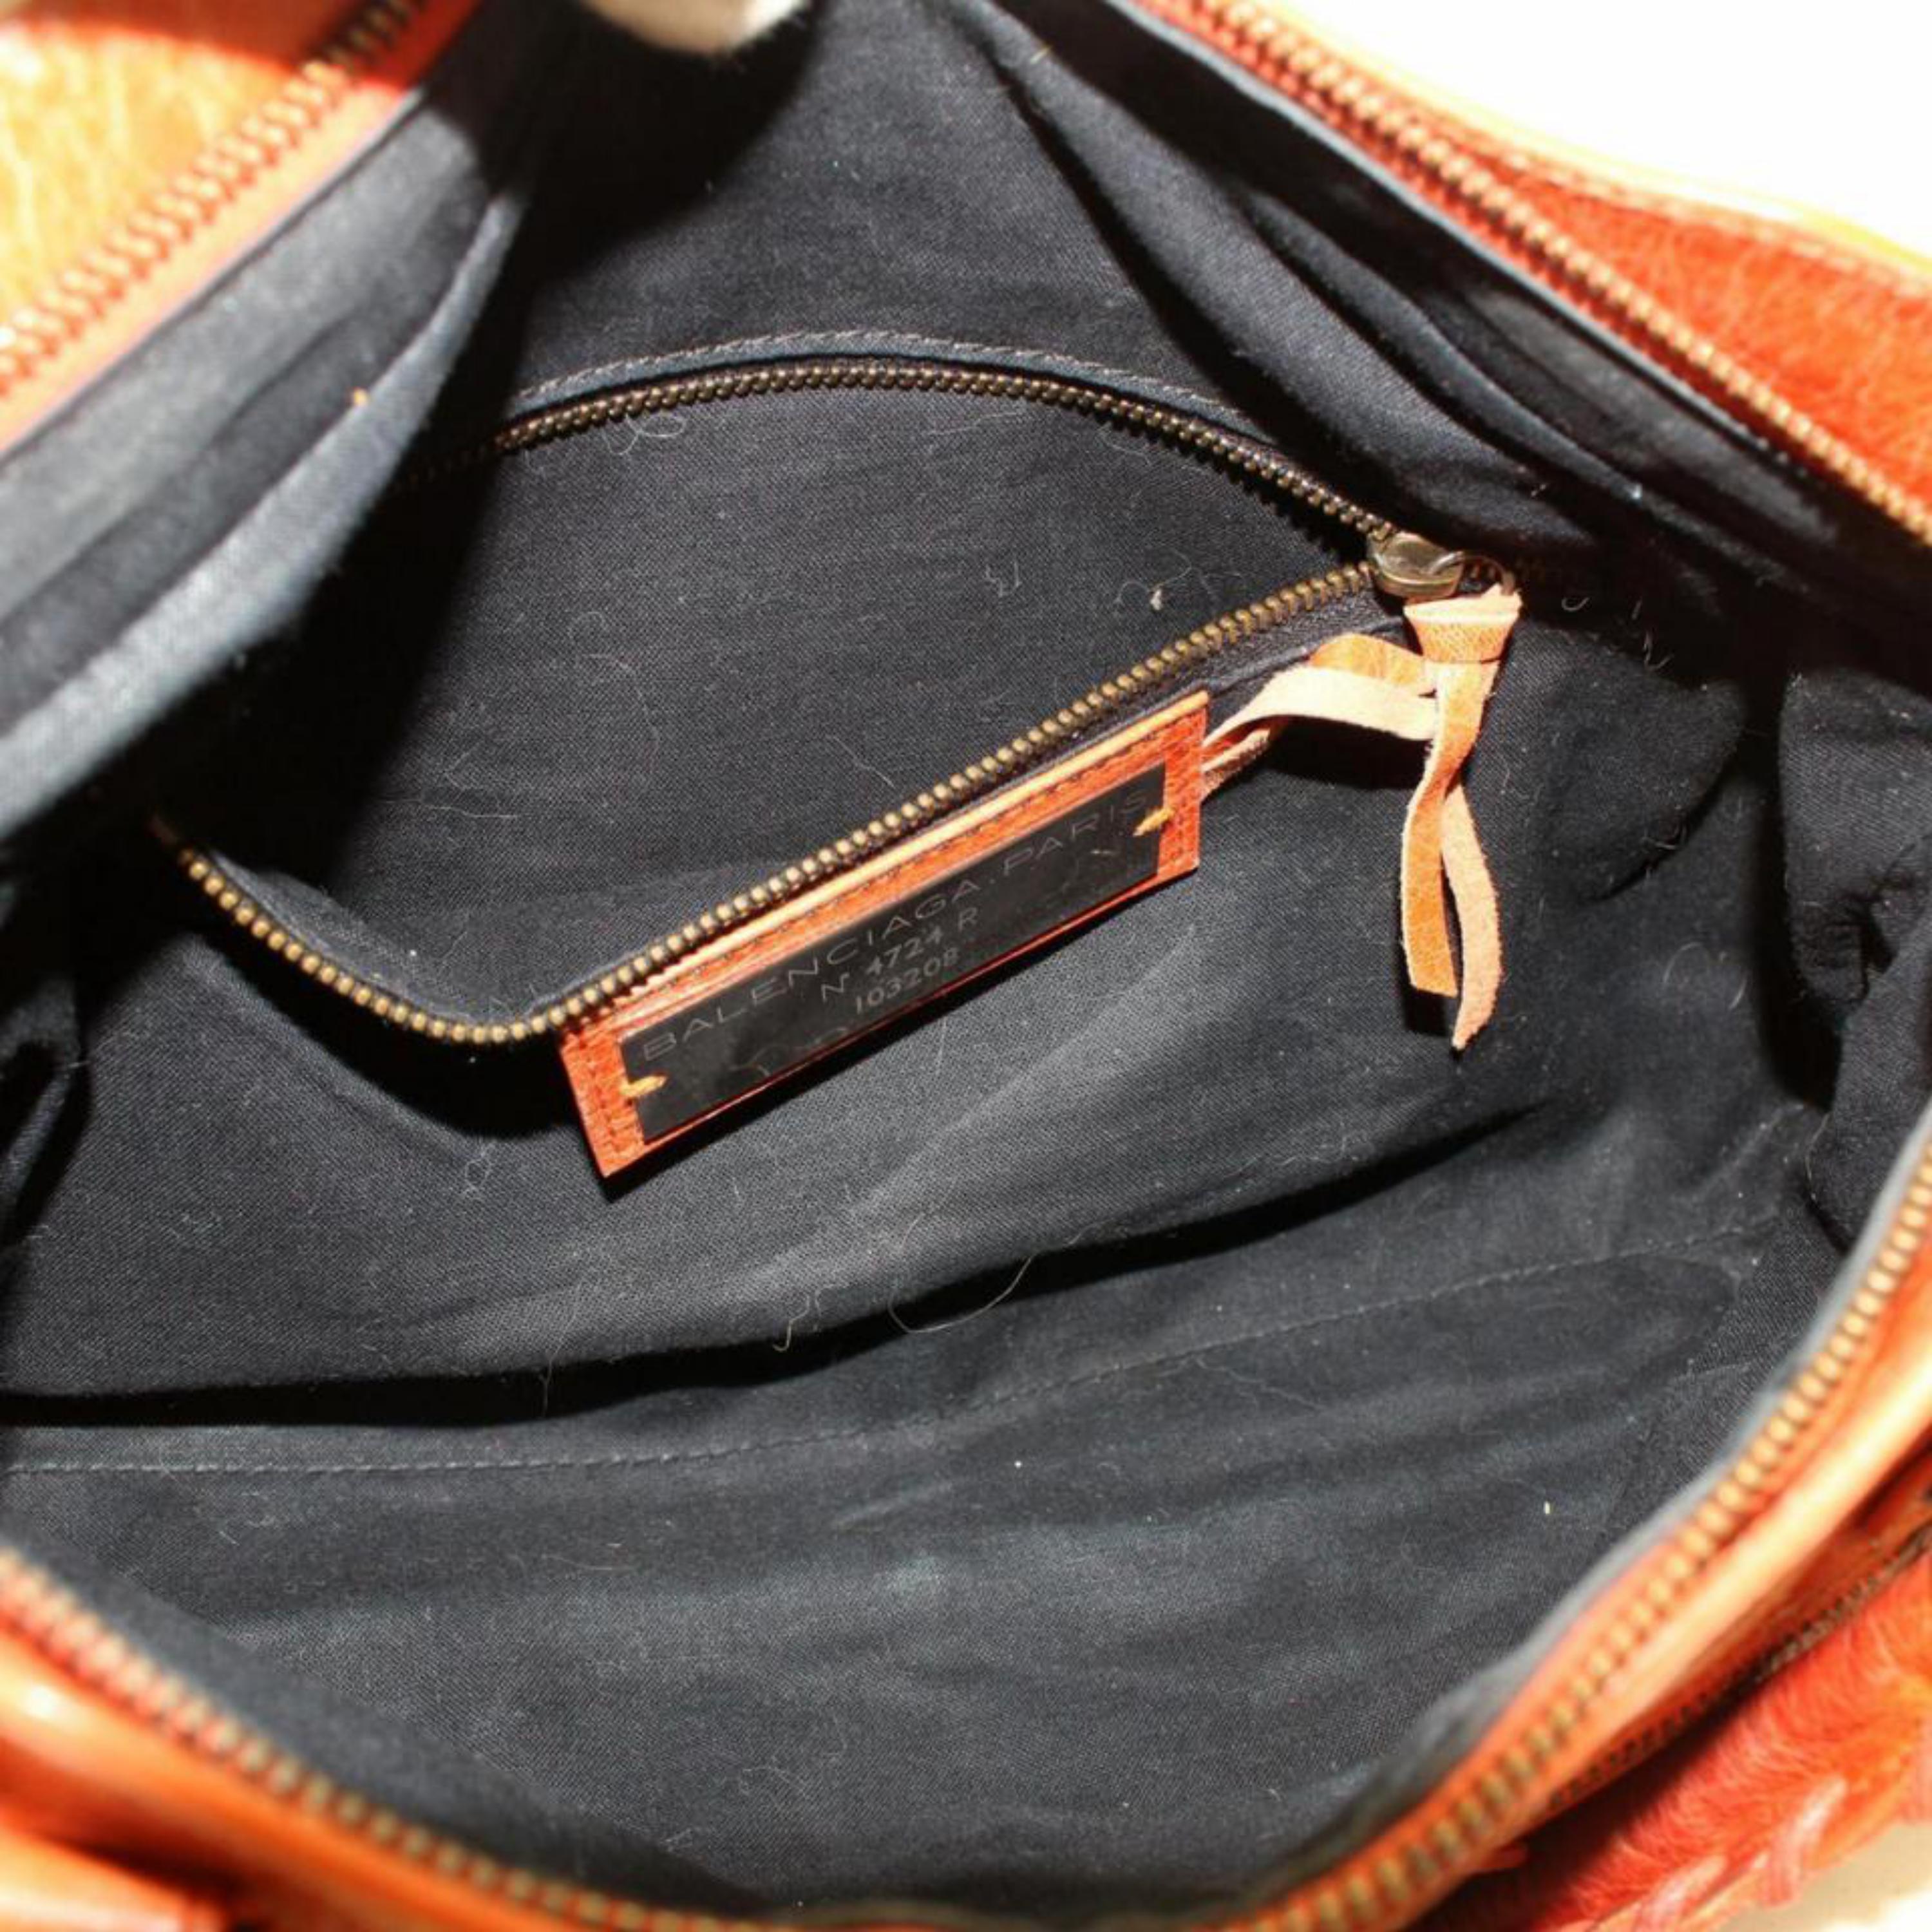 Balenciaga First 2way 868614 Orange Leather Shoulder Bag In Good Condition For Sale In Forest Hills, NY